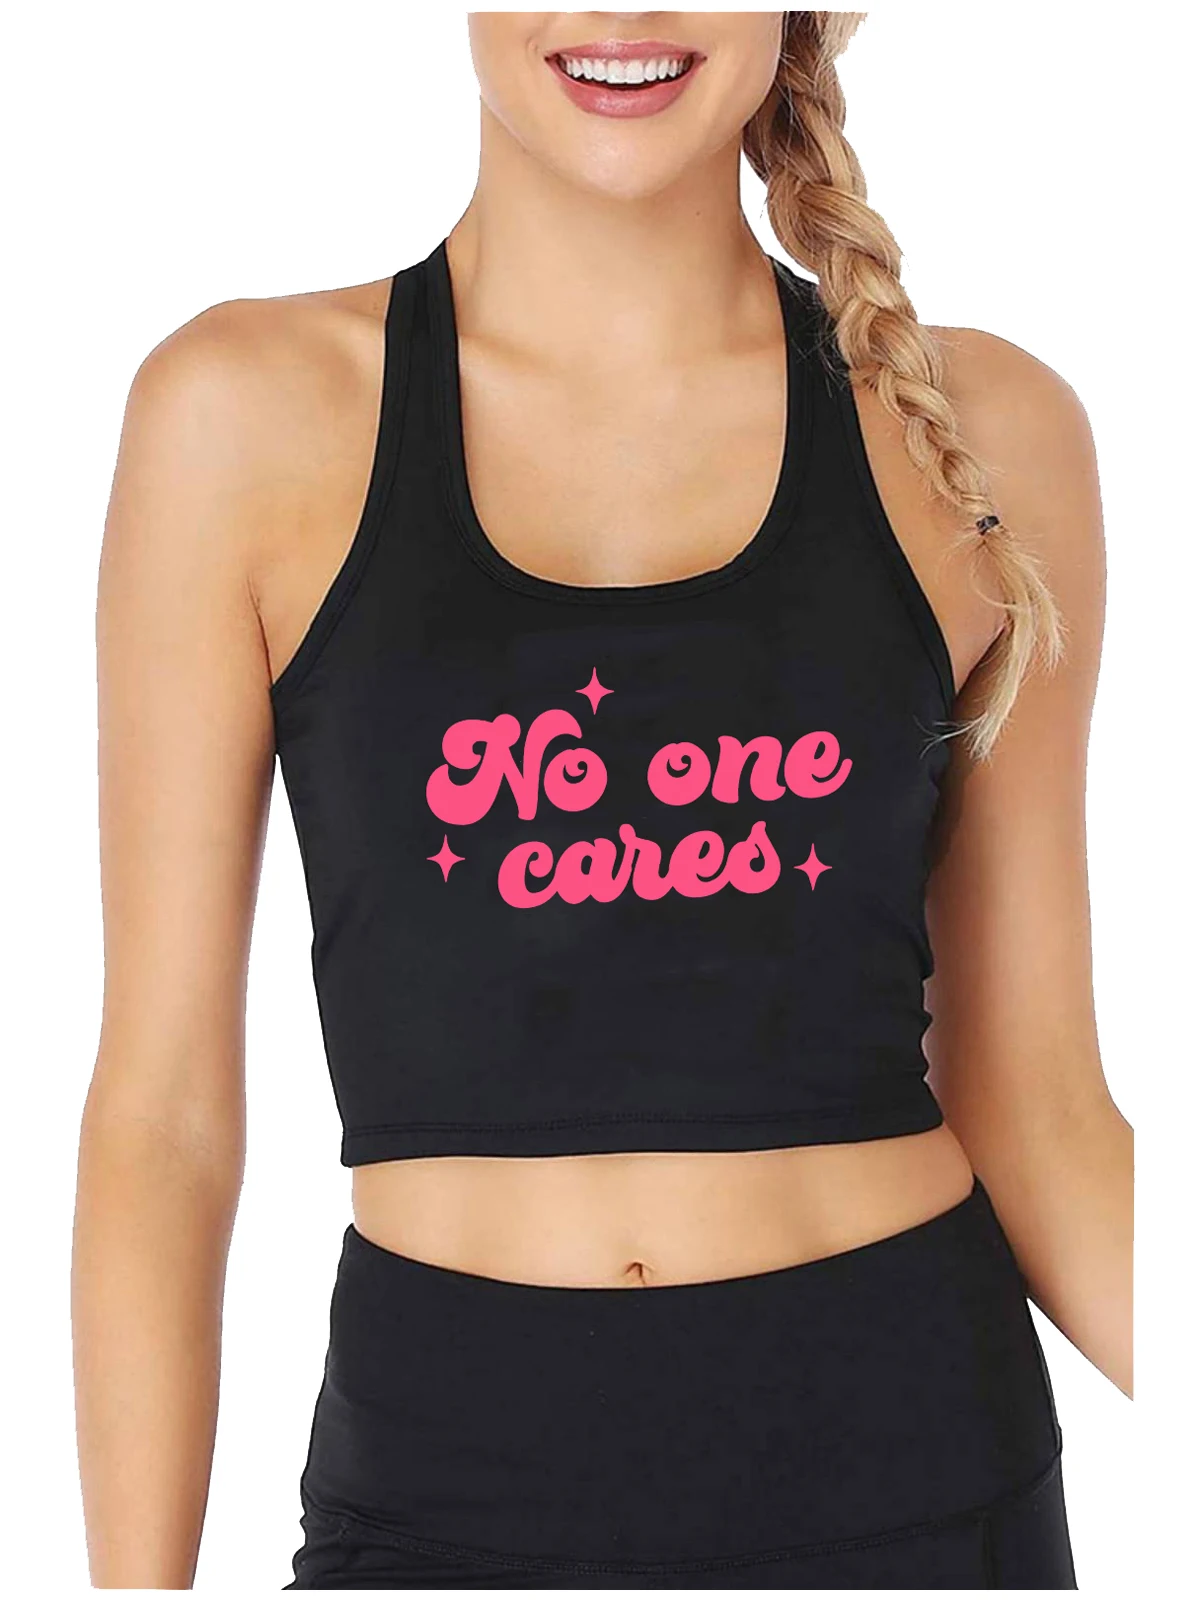 

No One Cares Graphic Design Crop Top Swinger Cute Irony Style Sexy Slim Tank Tops Hotwife Street Fashion Flirtatious Camisole